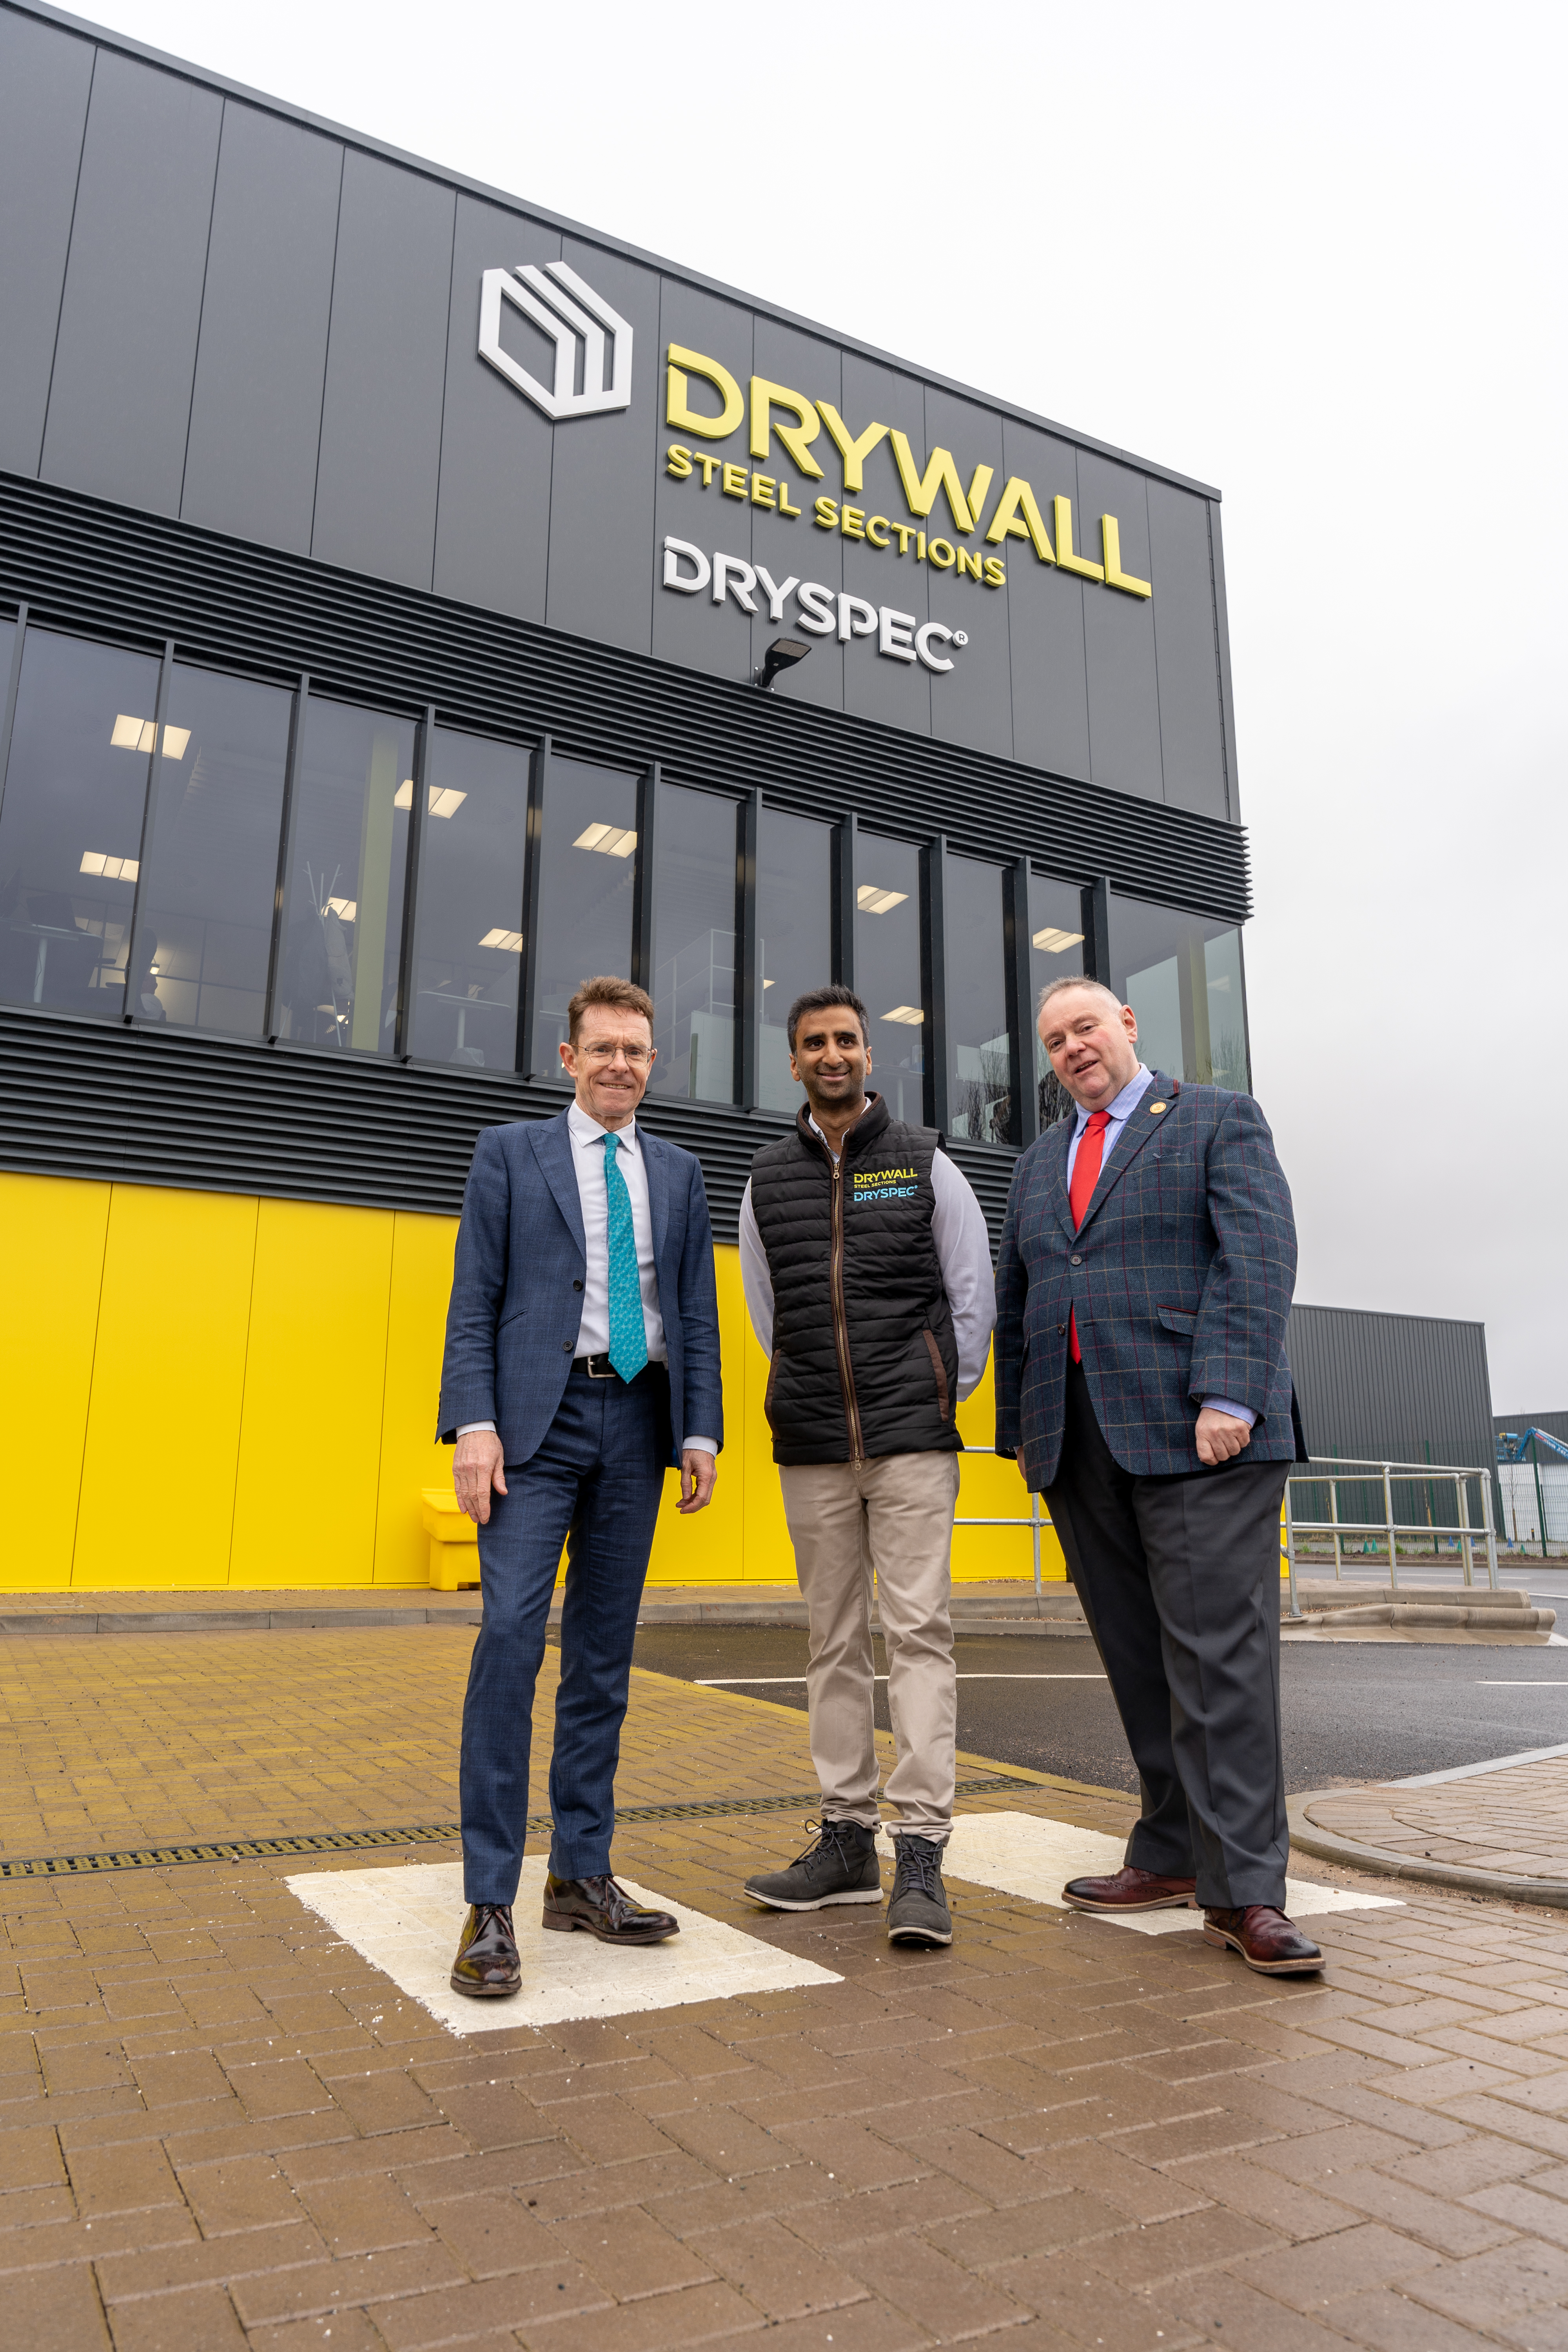 Andy Street, Mayor of the West Midlands and Chair of the WMCA; Mayank Gupta, director of DryWall, and Stephen Simkins, Leader of Wolverhampton City Council.